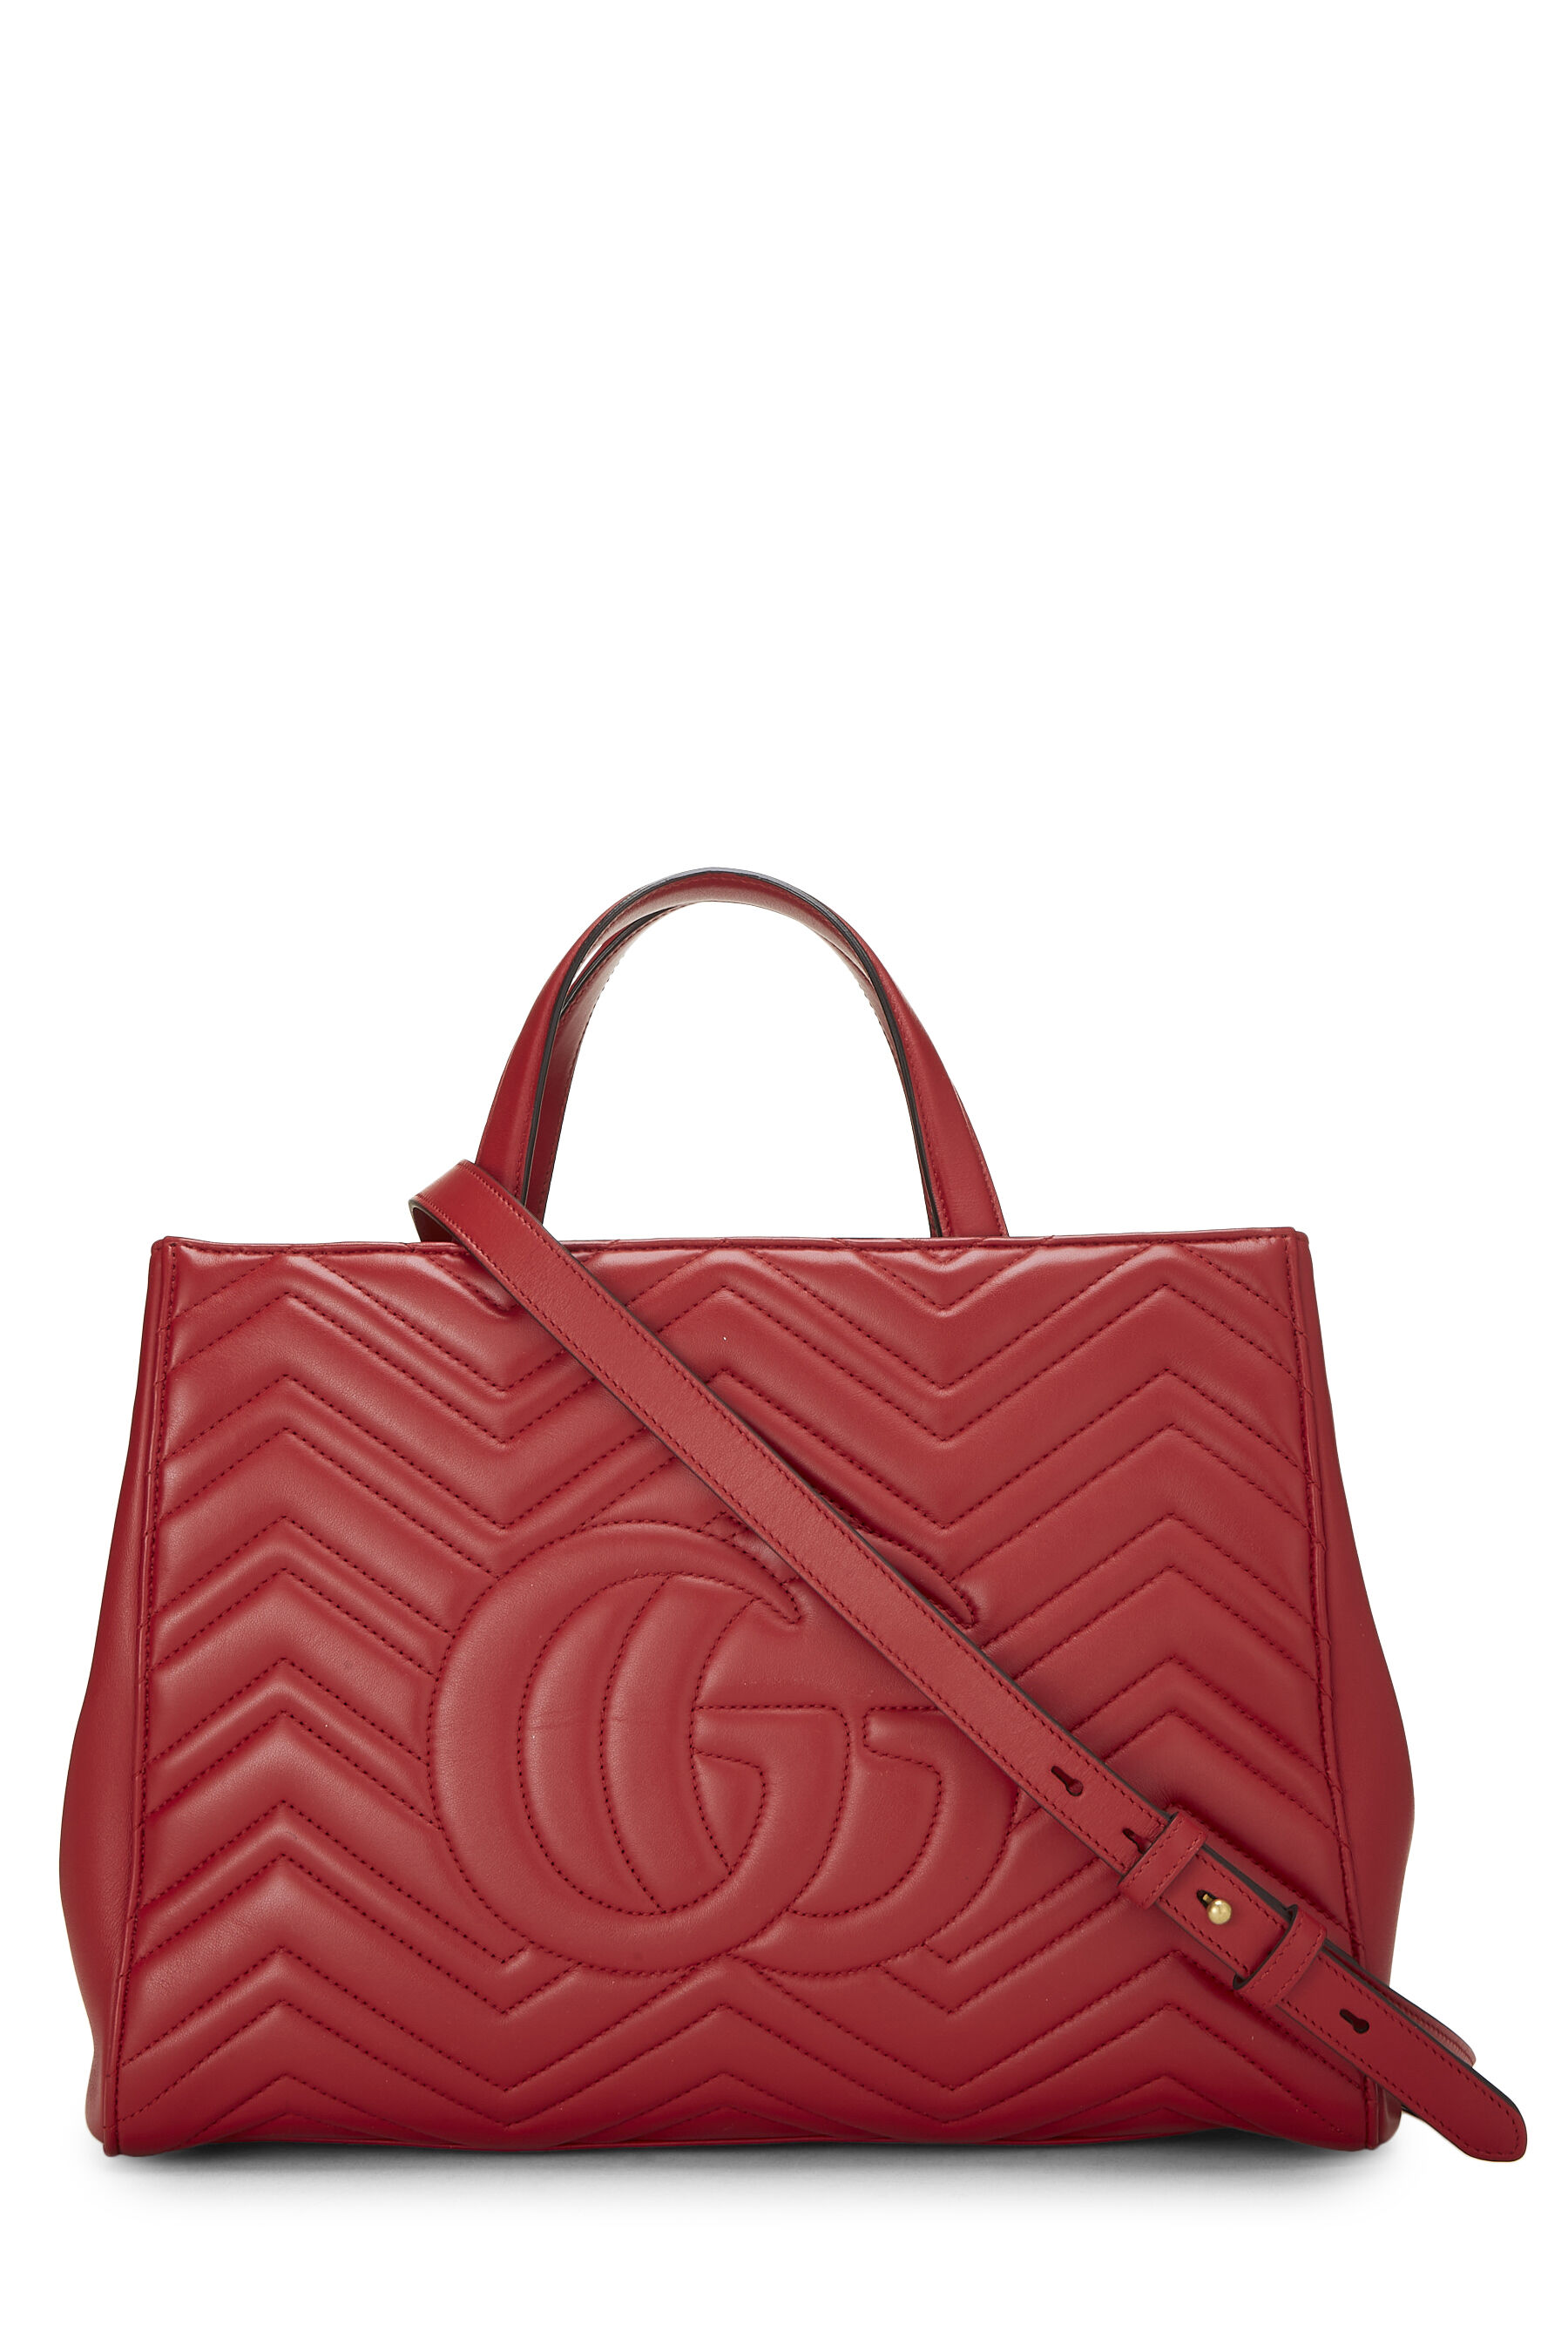 Red Leather GG Marmont Top Handle Bag Medium